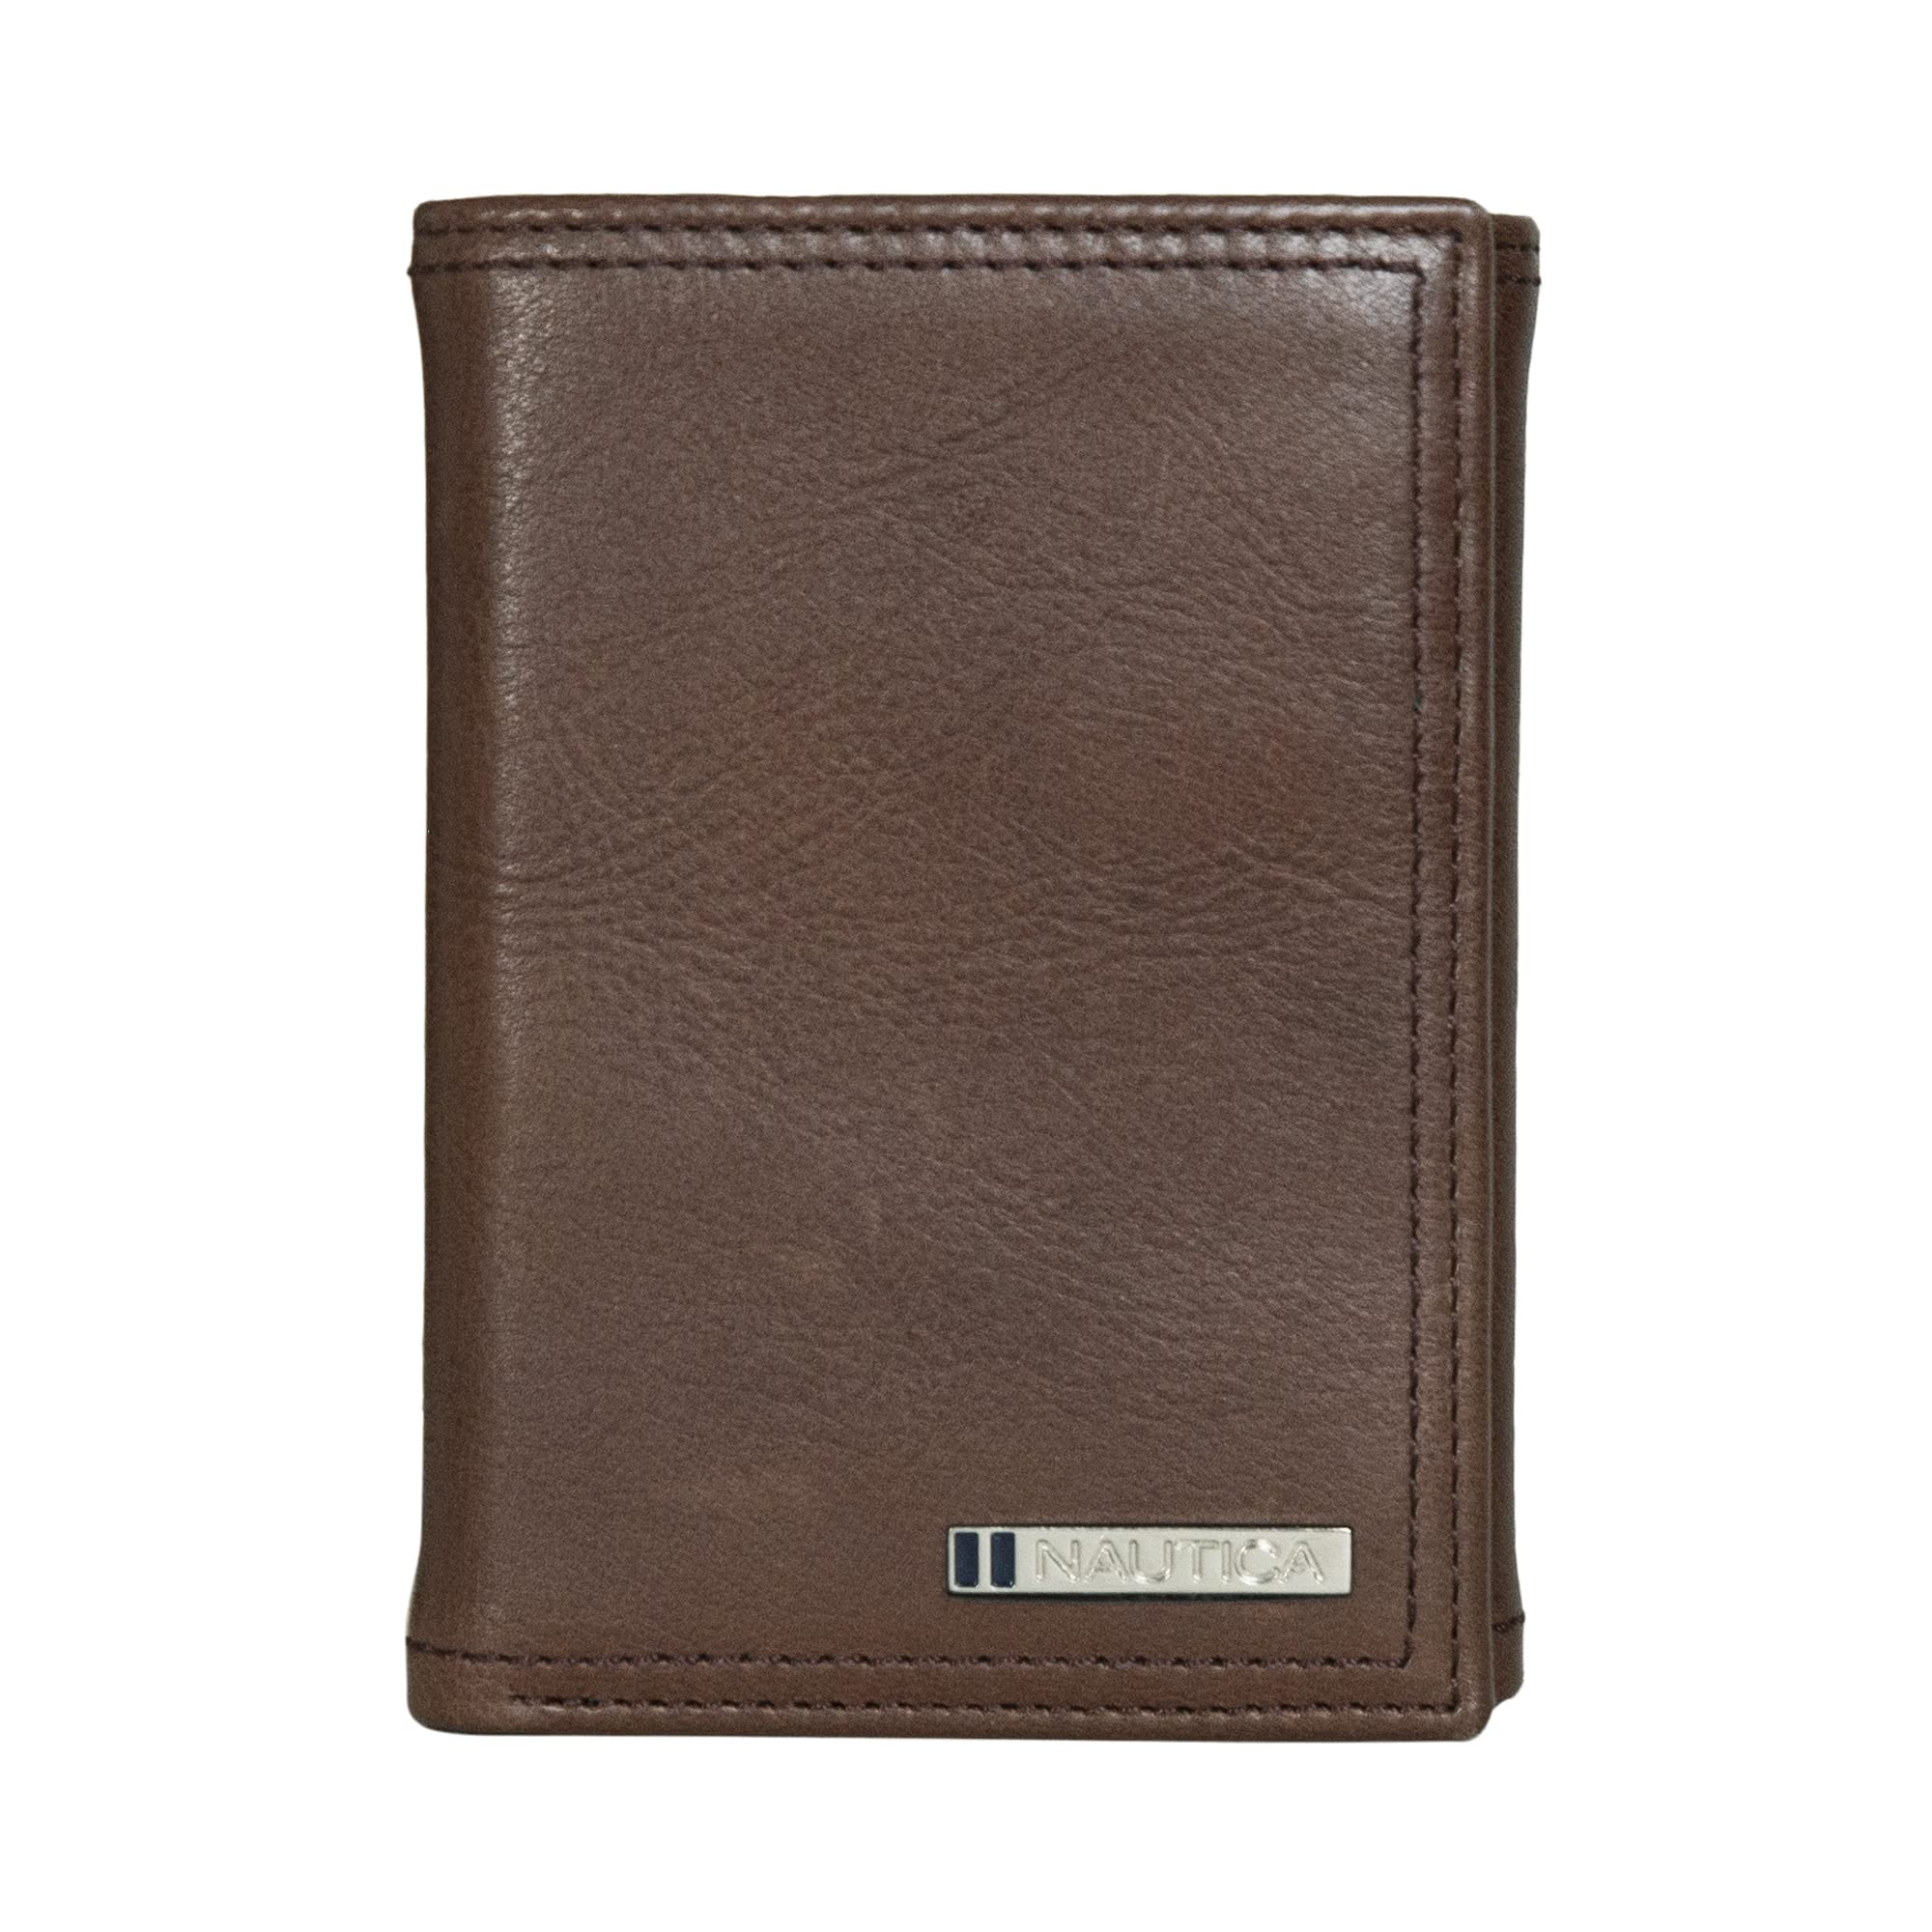 Nautica Men's Enameled Logo Tumbled Leather Trifold Wallet with RFID Protection-Brown, One Size